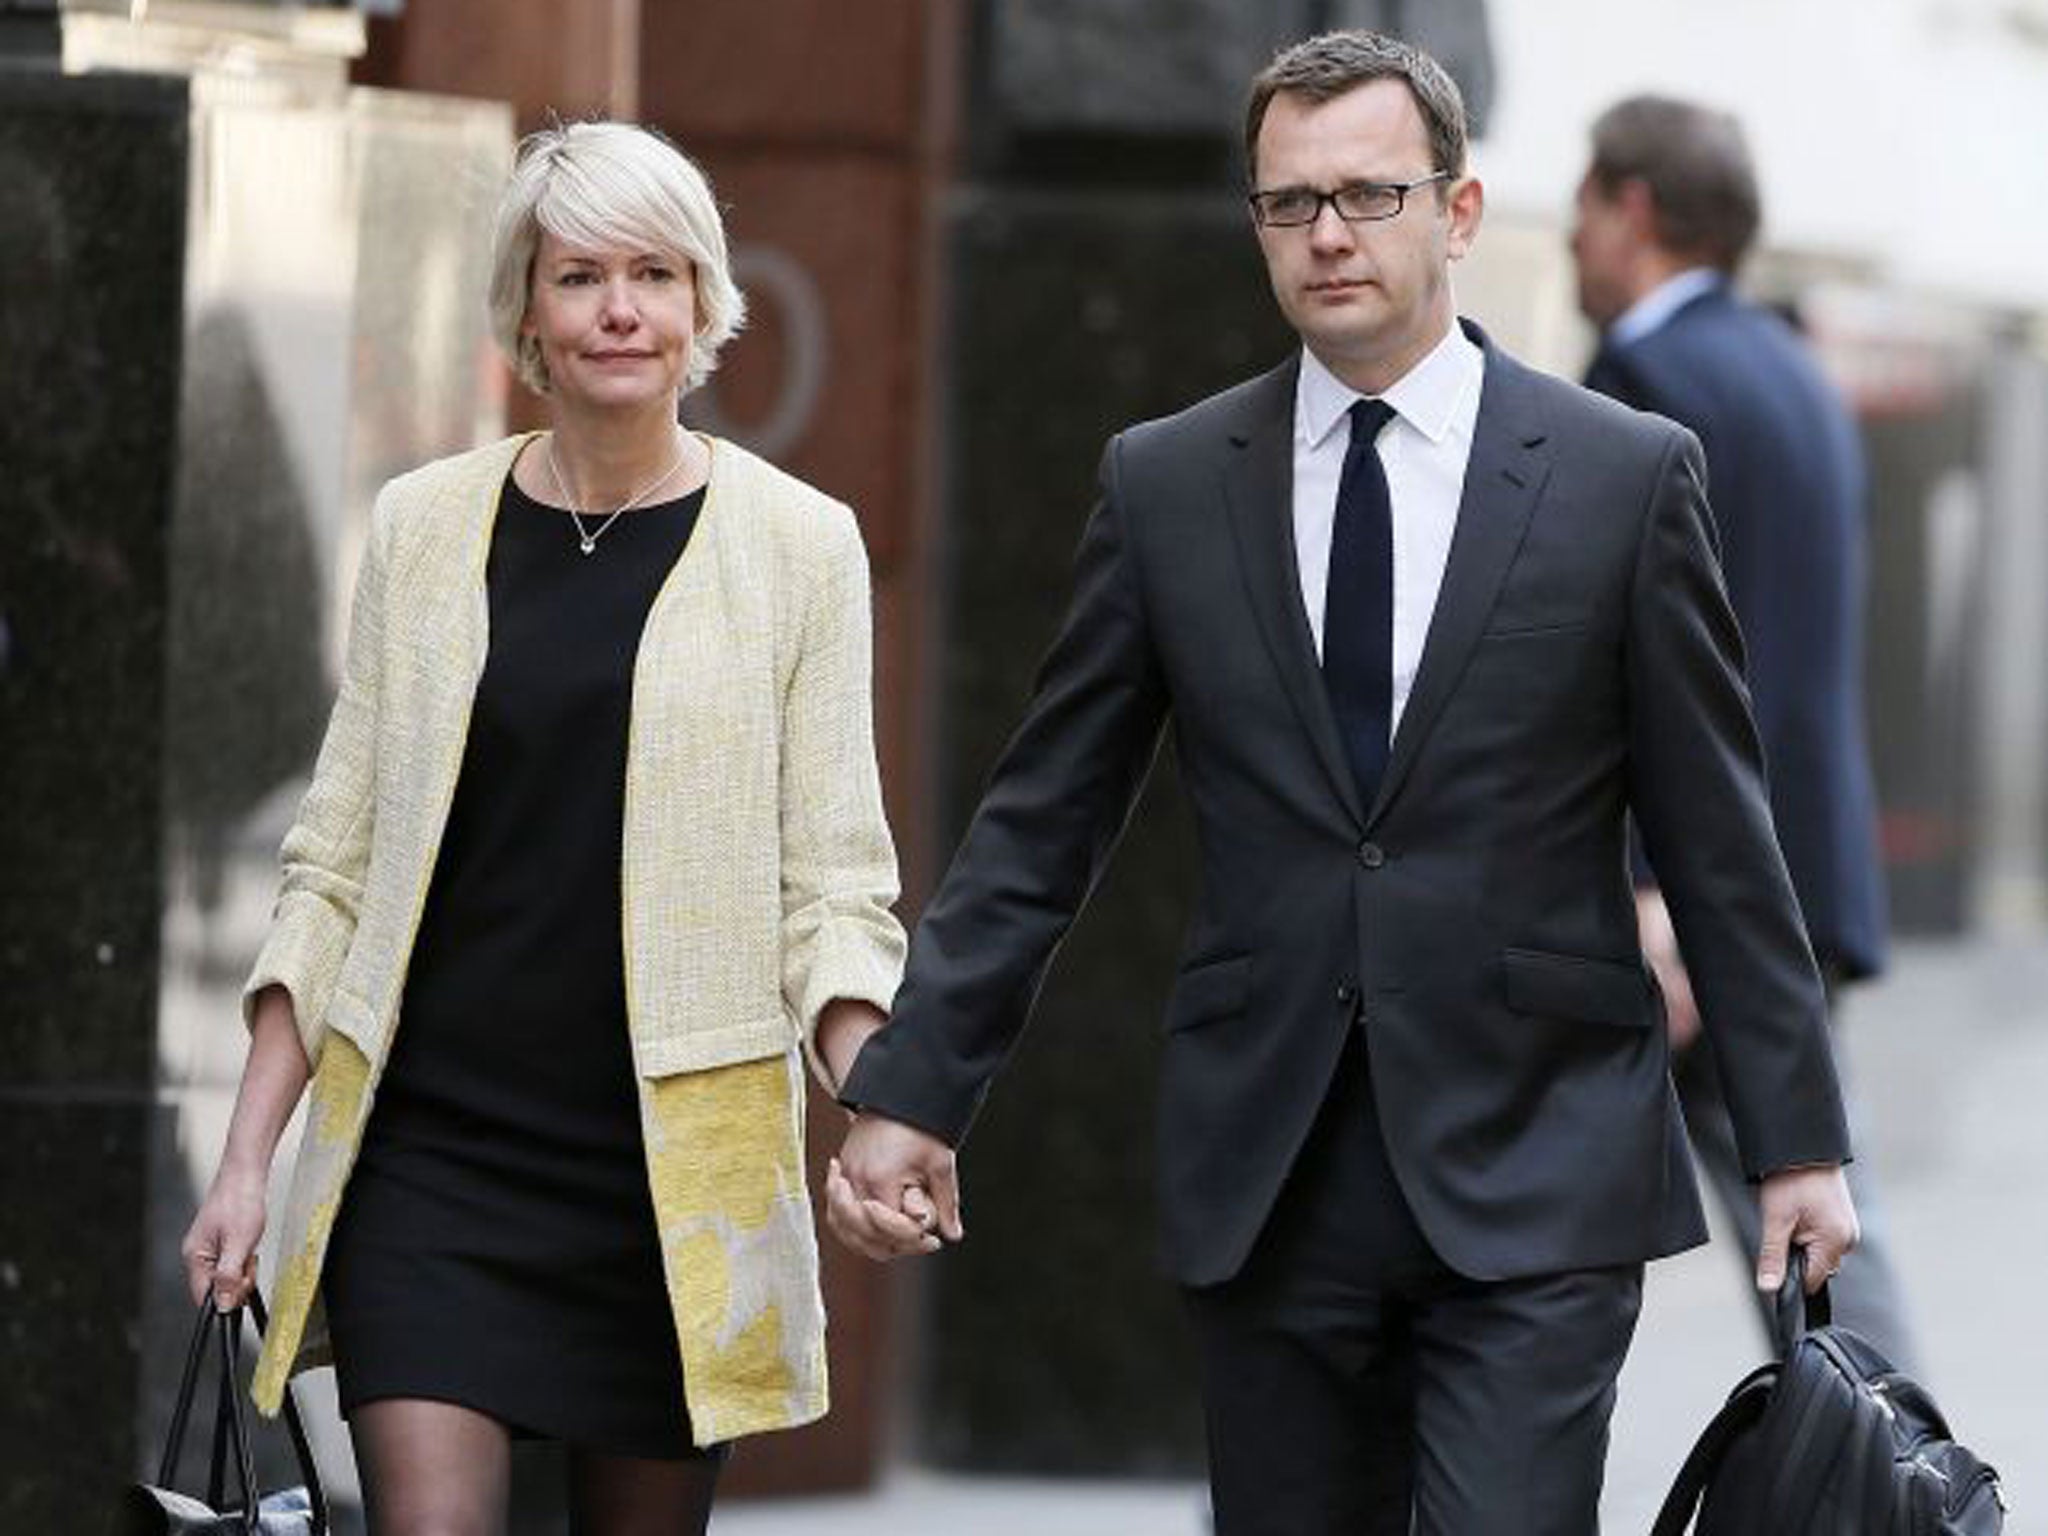 Andy Coulson and his wife, Eloise Patrick, arrive at the Old Bailey. He has acknowledged the pain he caused her